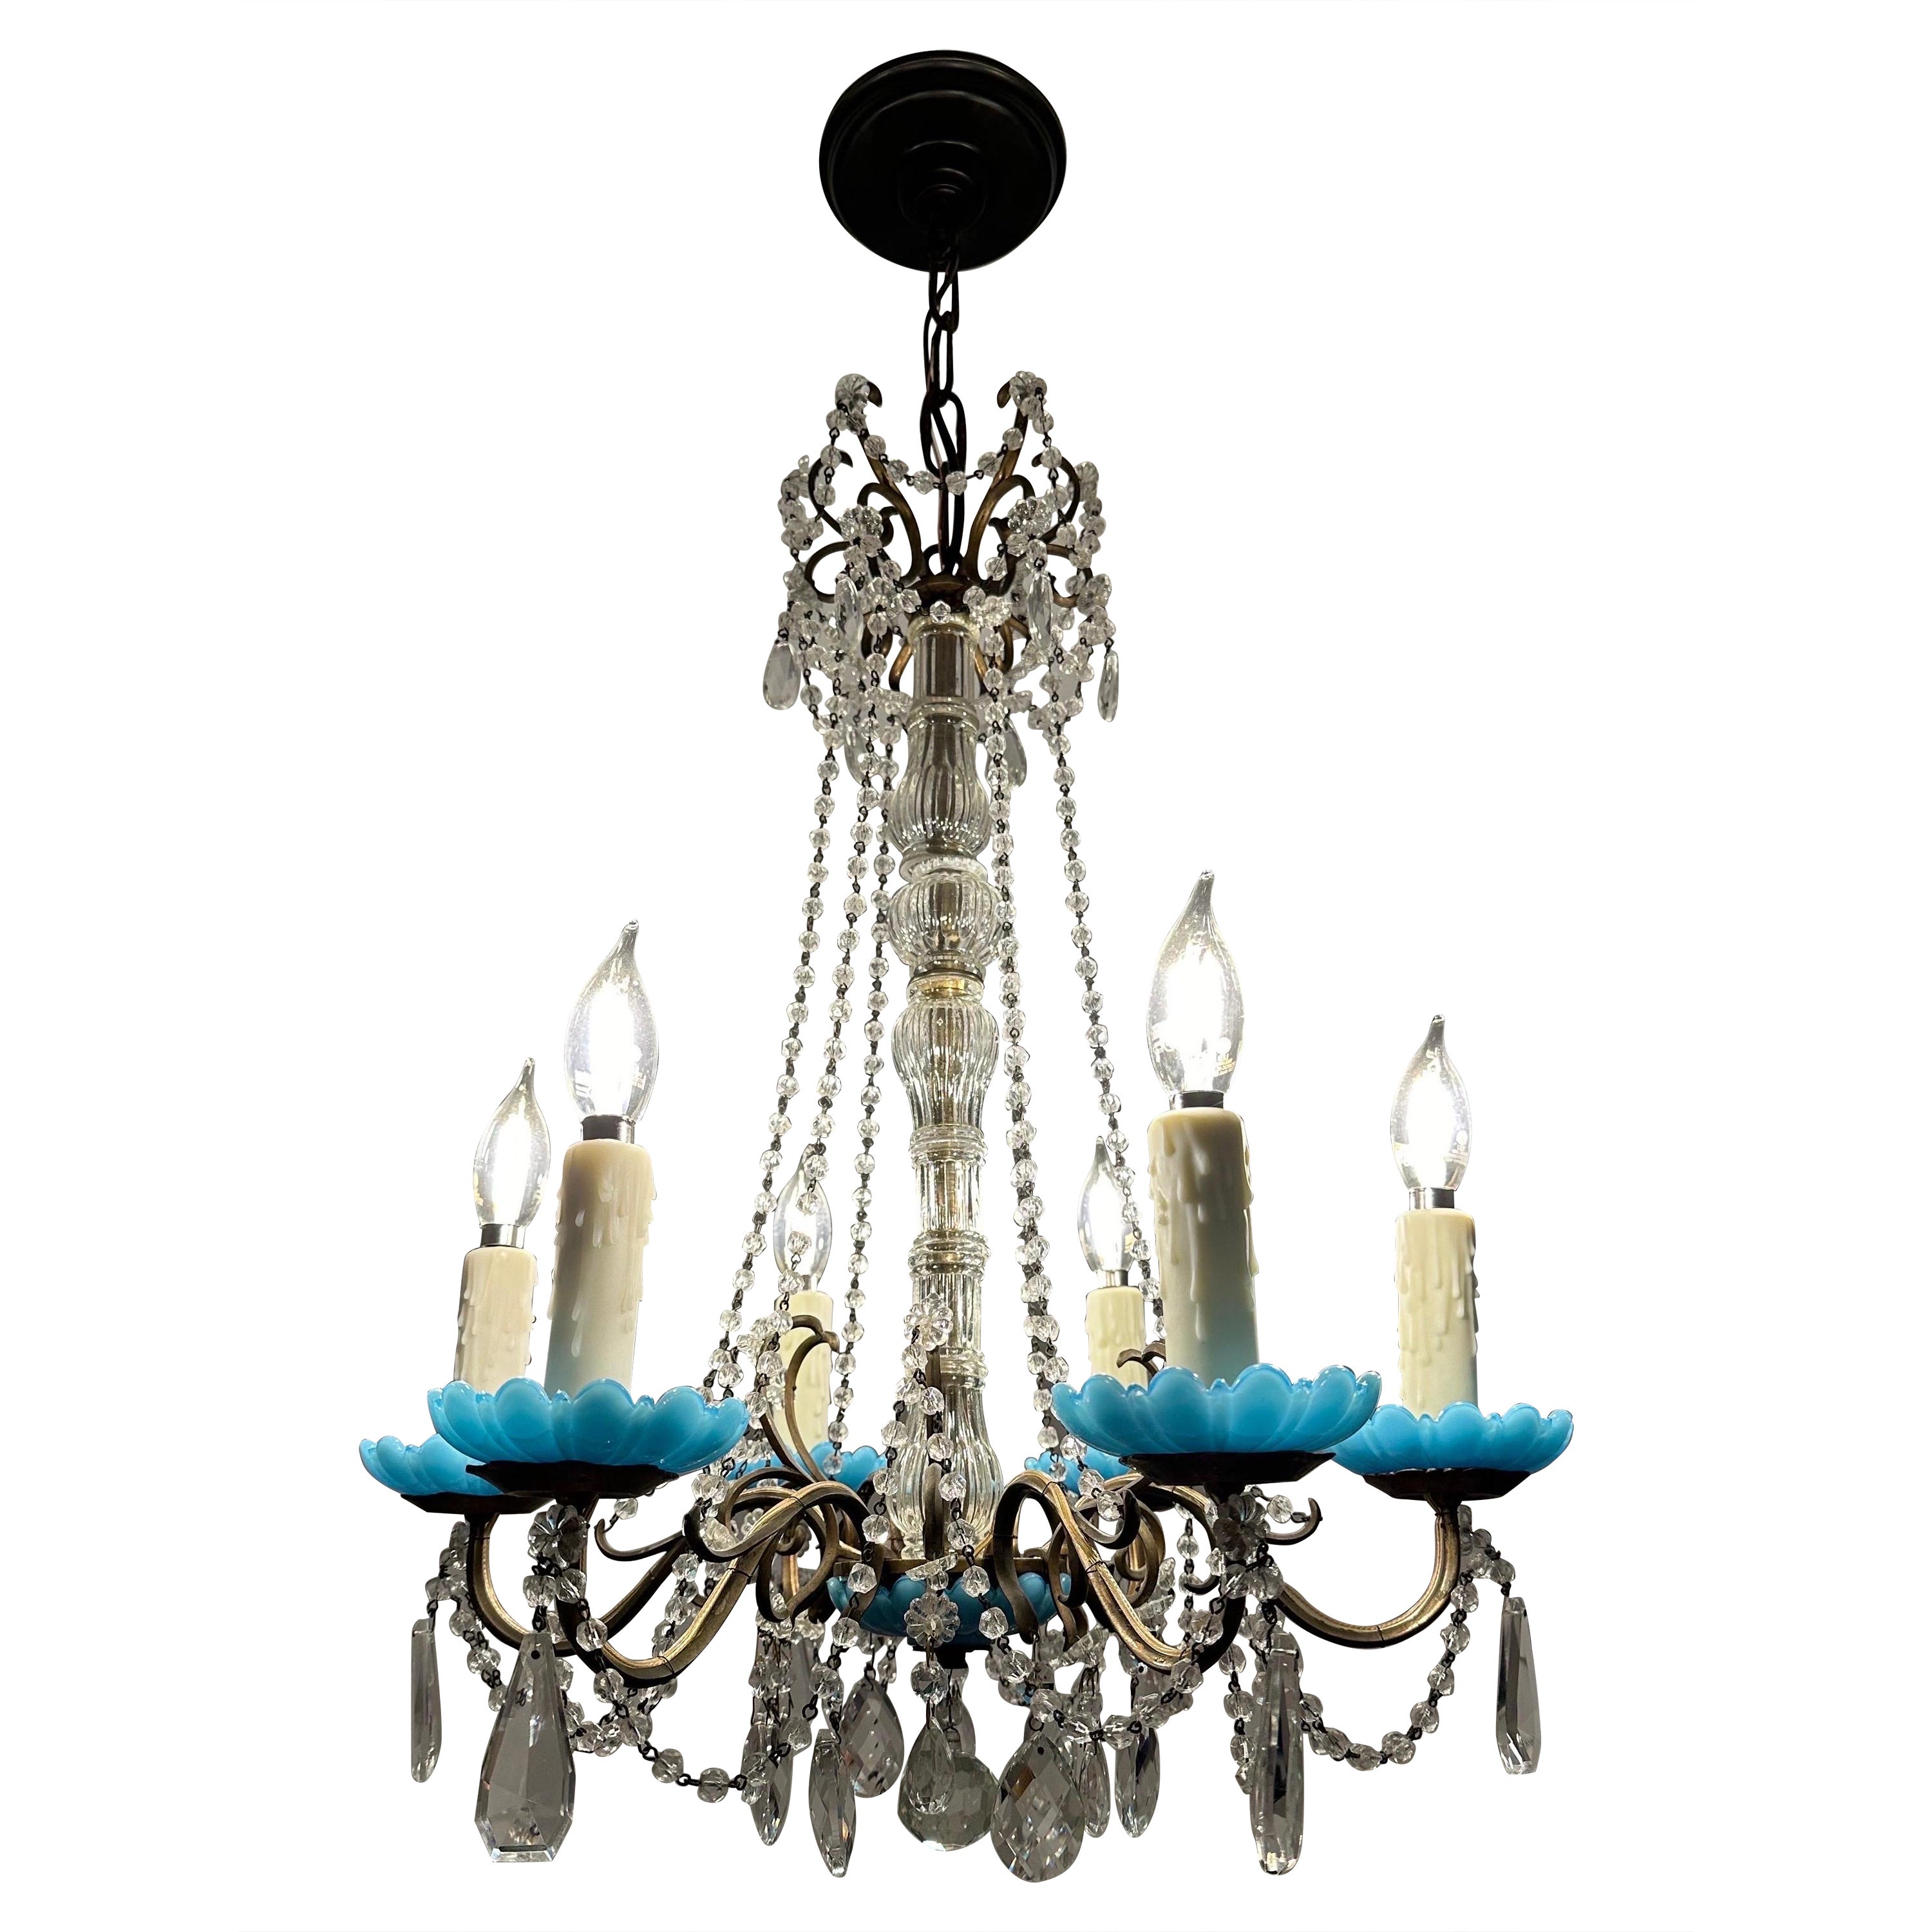 Rare and unique 18th century French crystal chandelier with blue accent. 